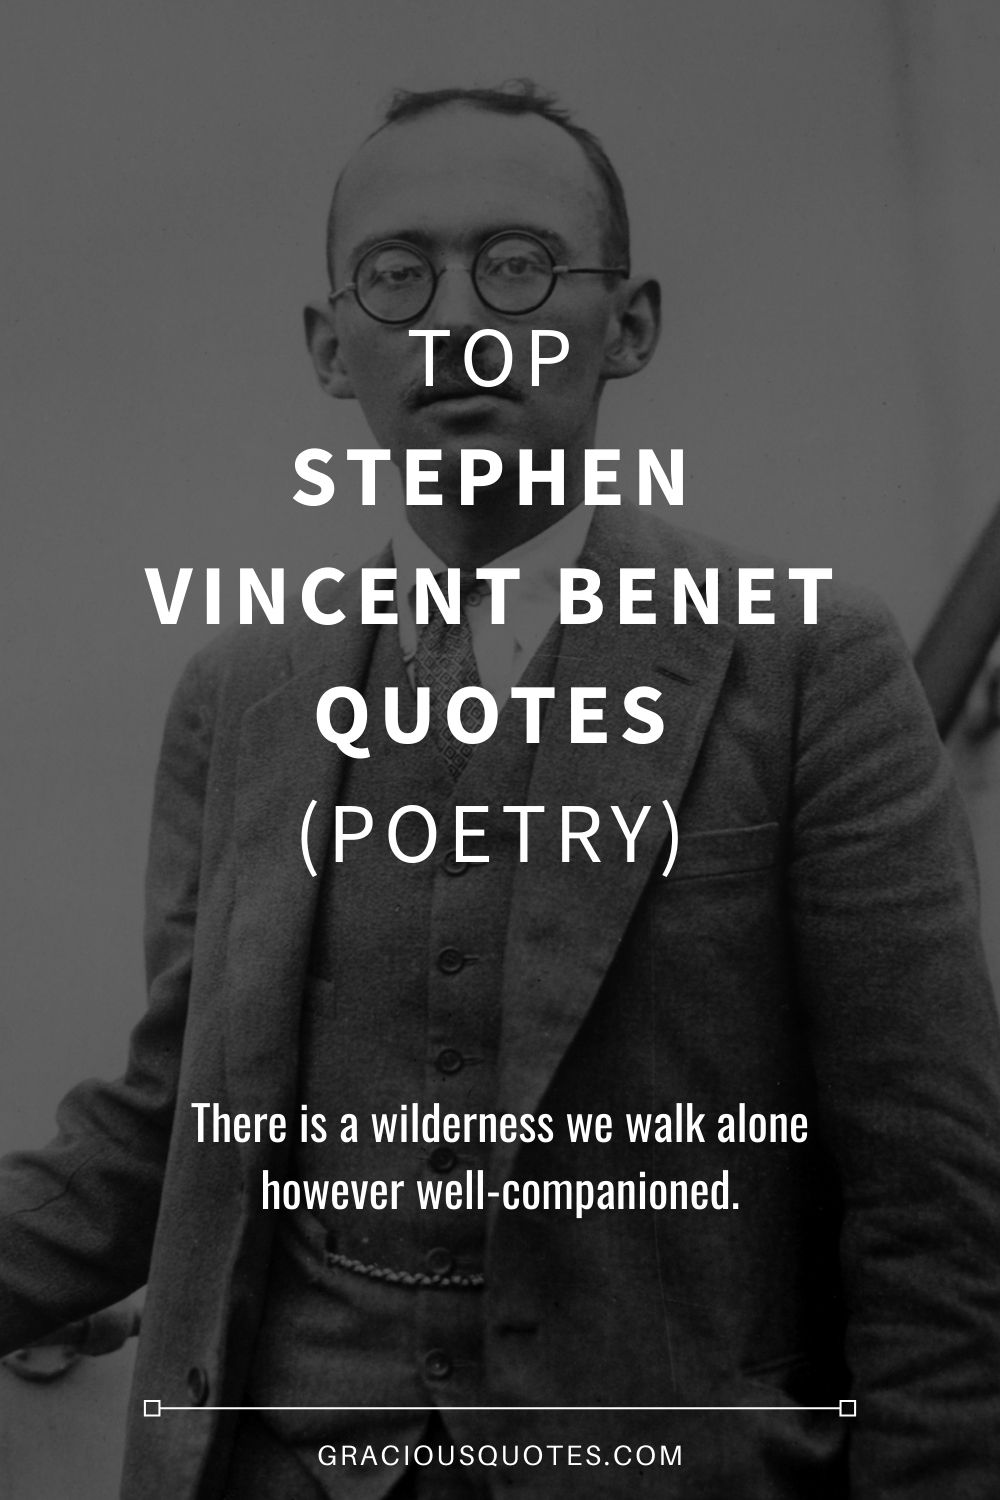 Top Stephen Vincent Benet Quotes (POETRY) - Gracious Quotes